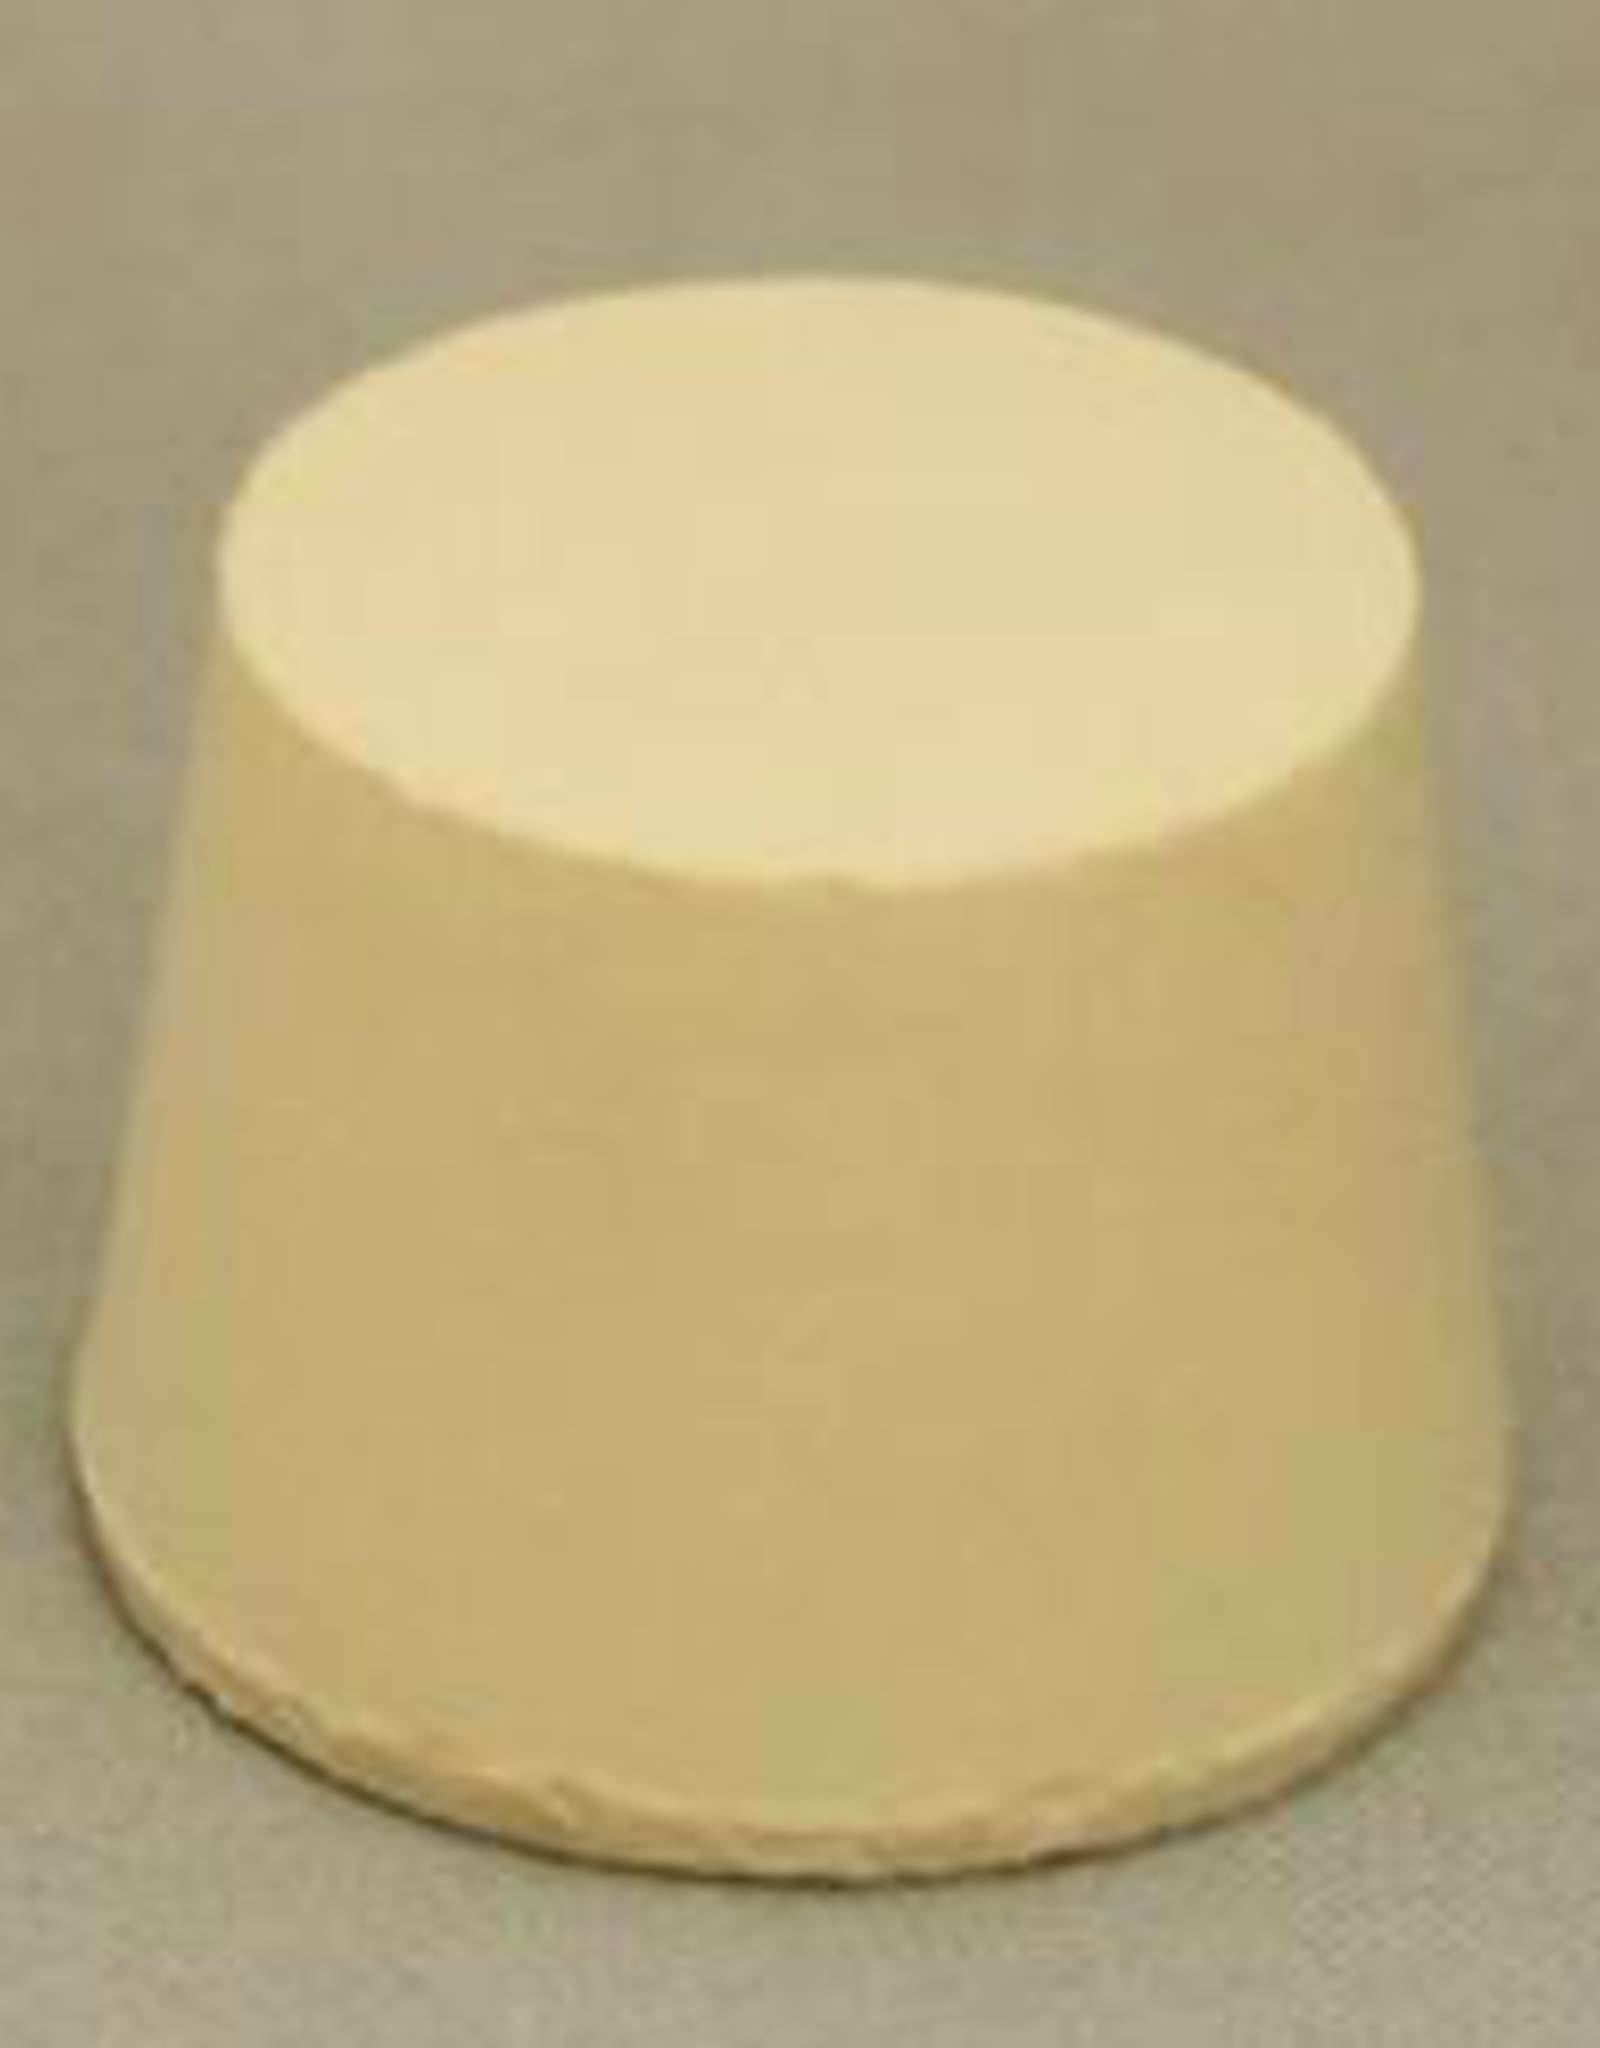 #6.5 SOLID RUBBER STOPPER